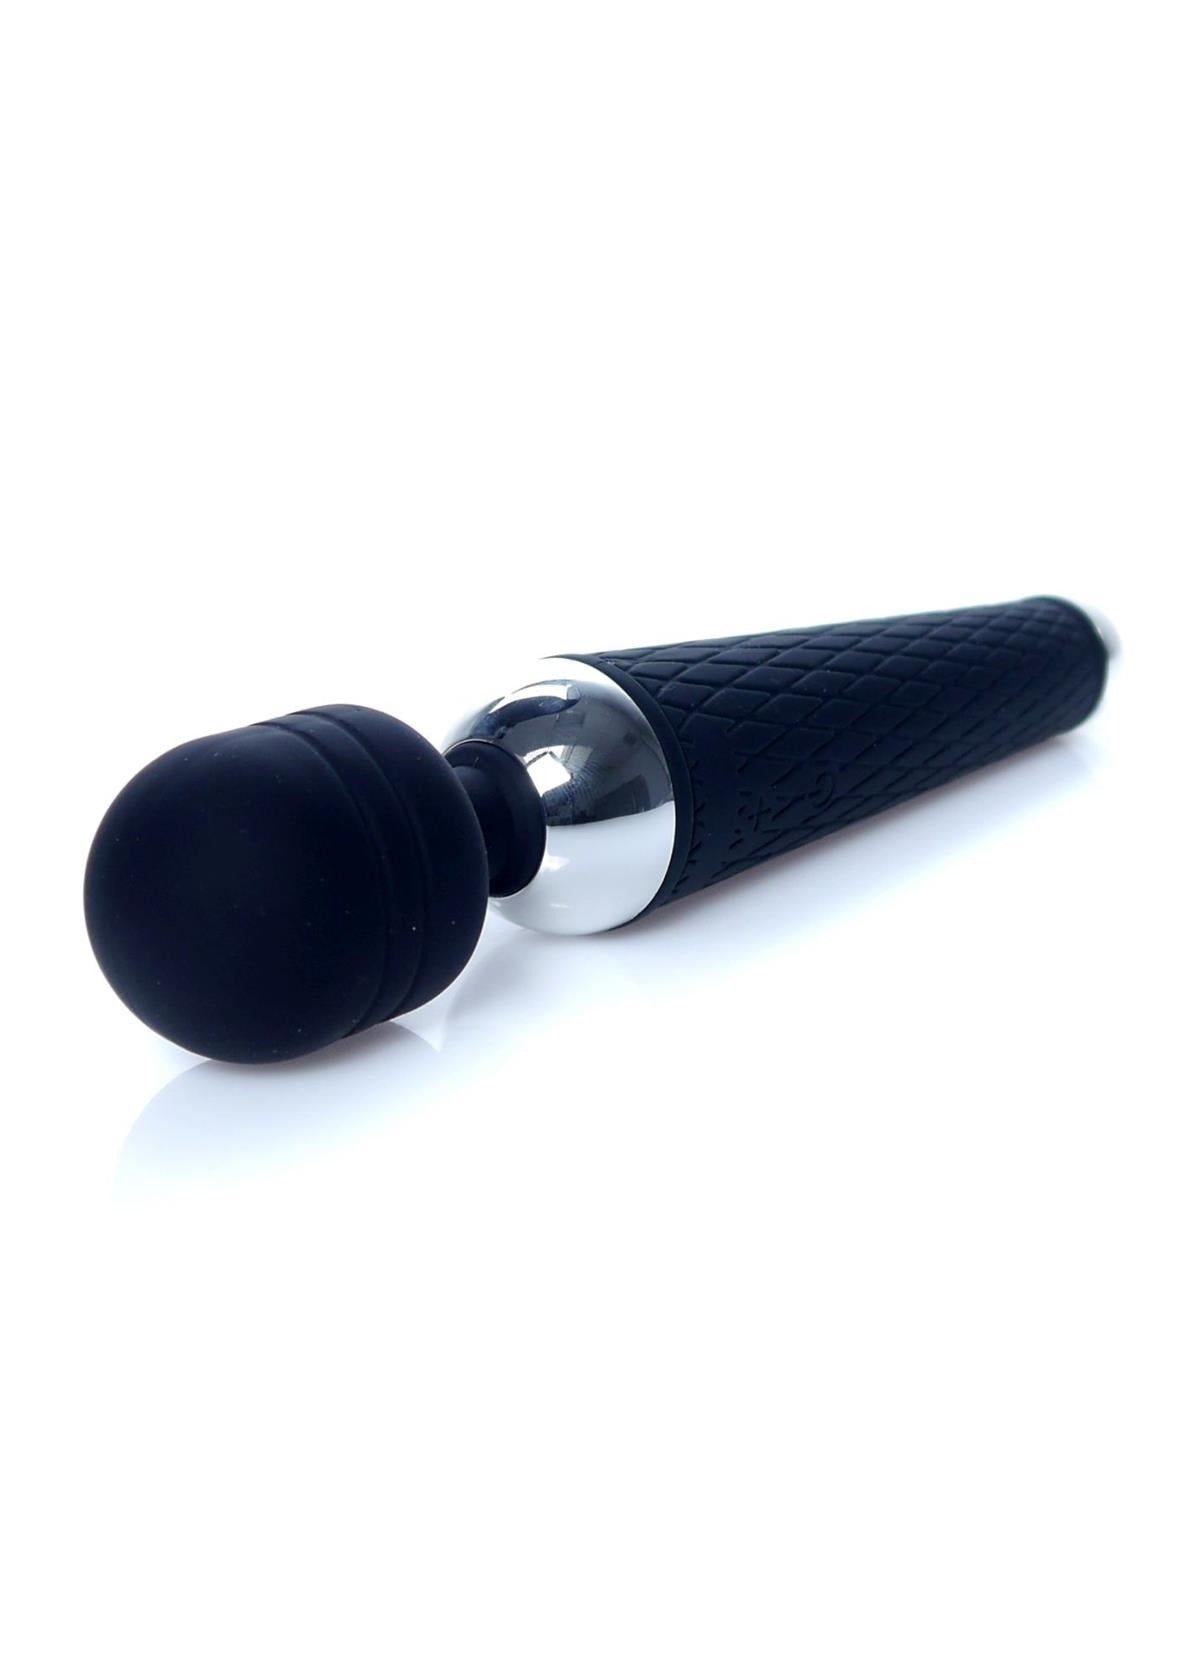 Bossoftoys - 22-00037 - Power Wand massager - Silicone Massager Black USB - 16 Functions - USB rechargeable